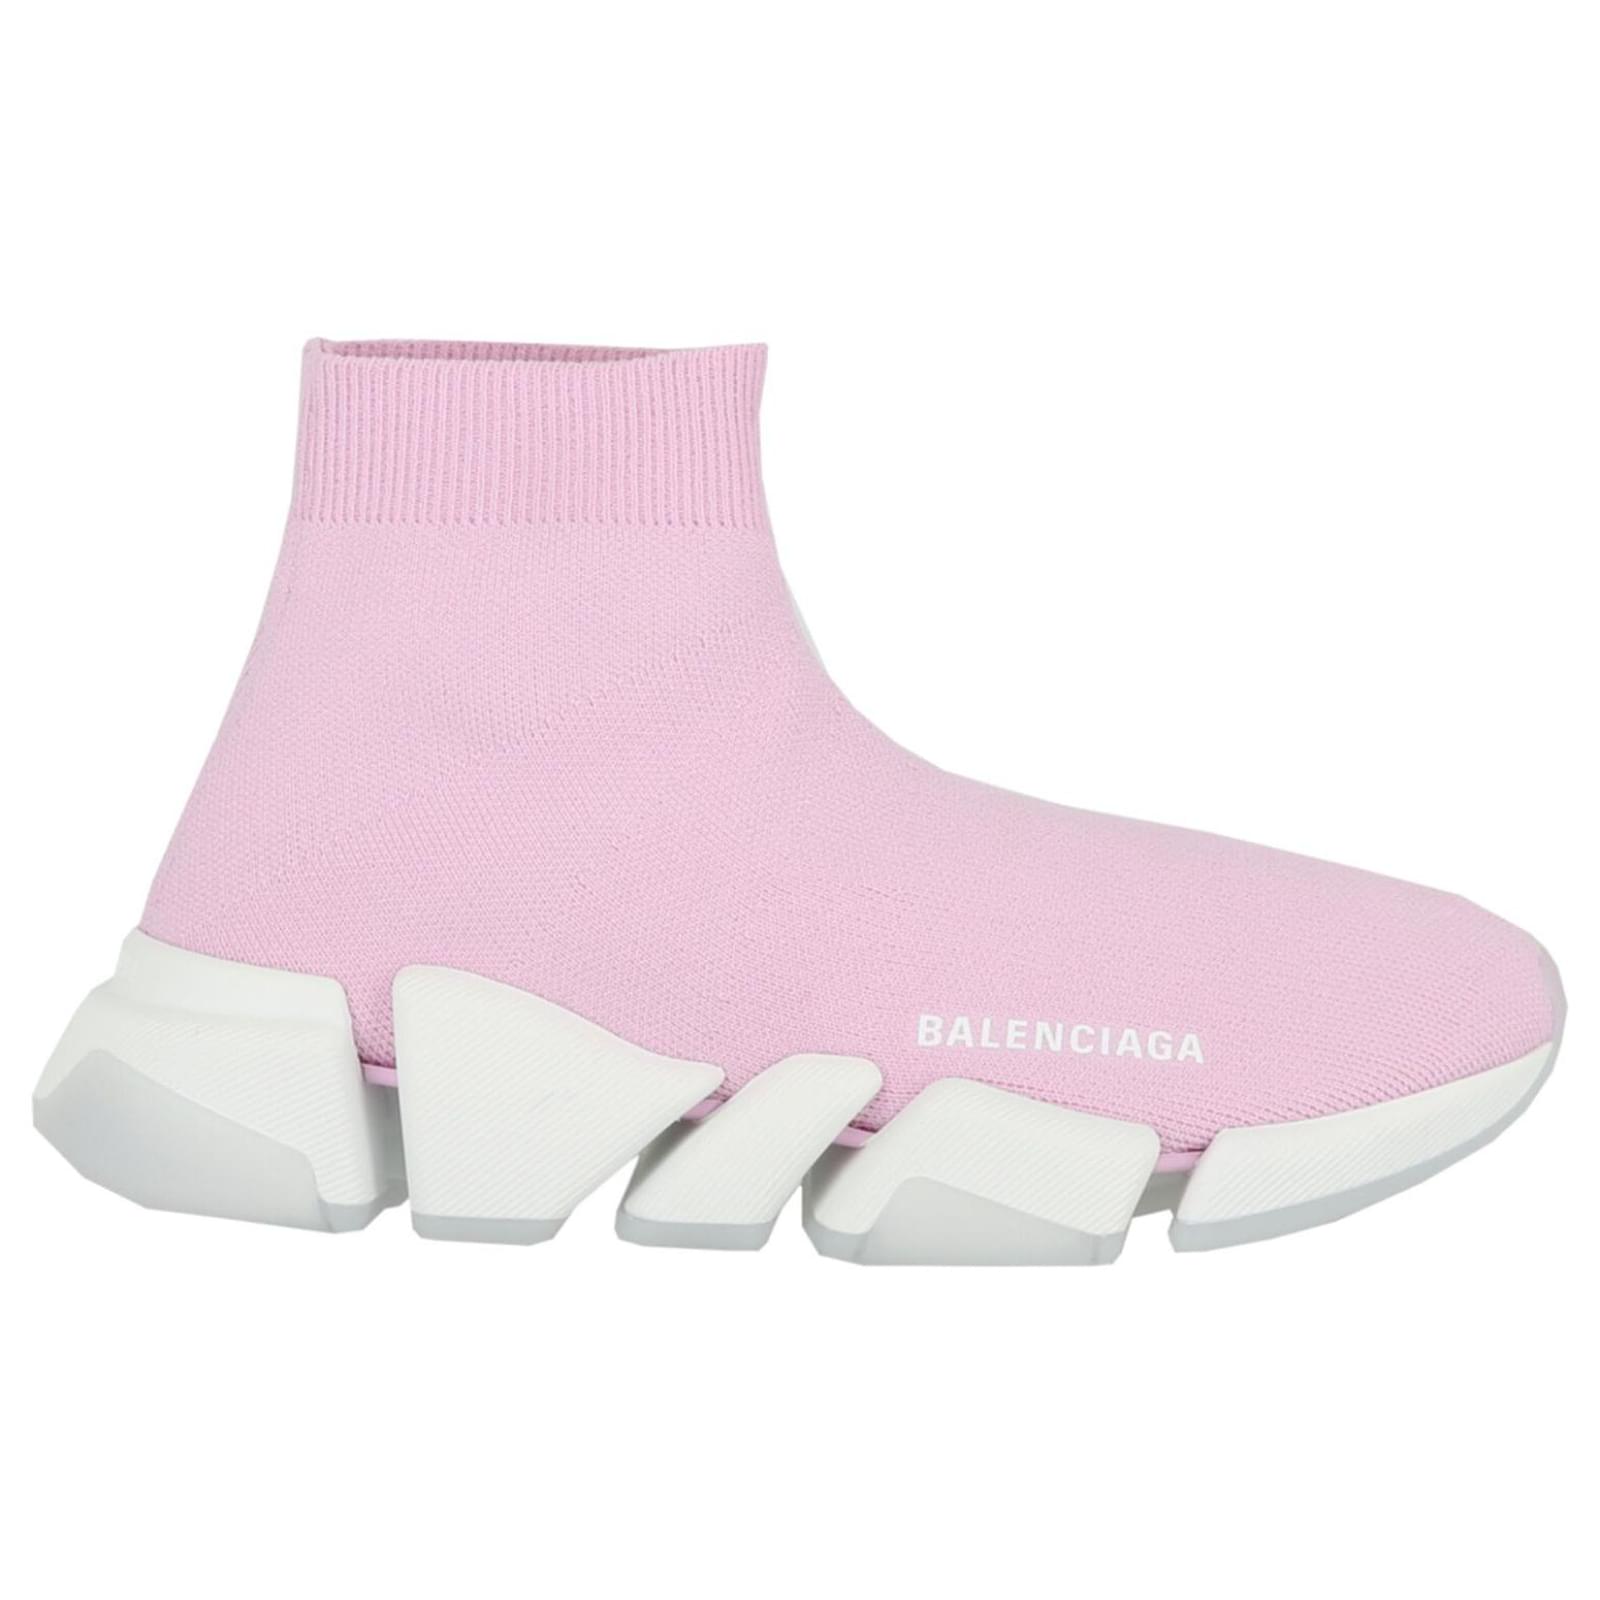 Track Clear Sole Sneakers in Pink  Balenciaga  Mytheresa